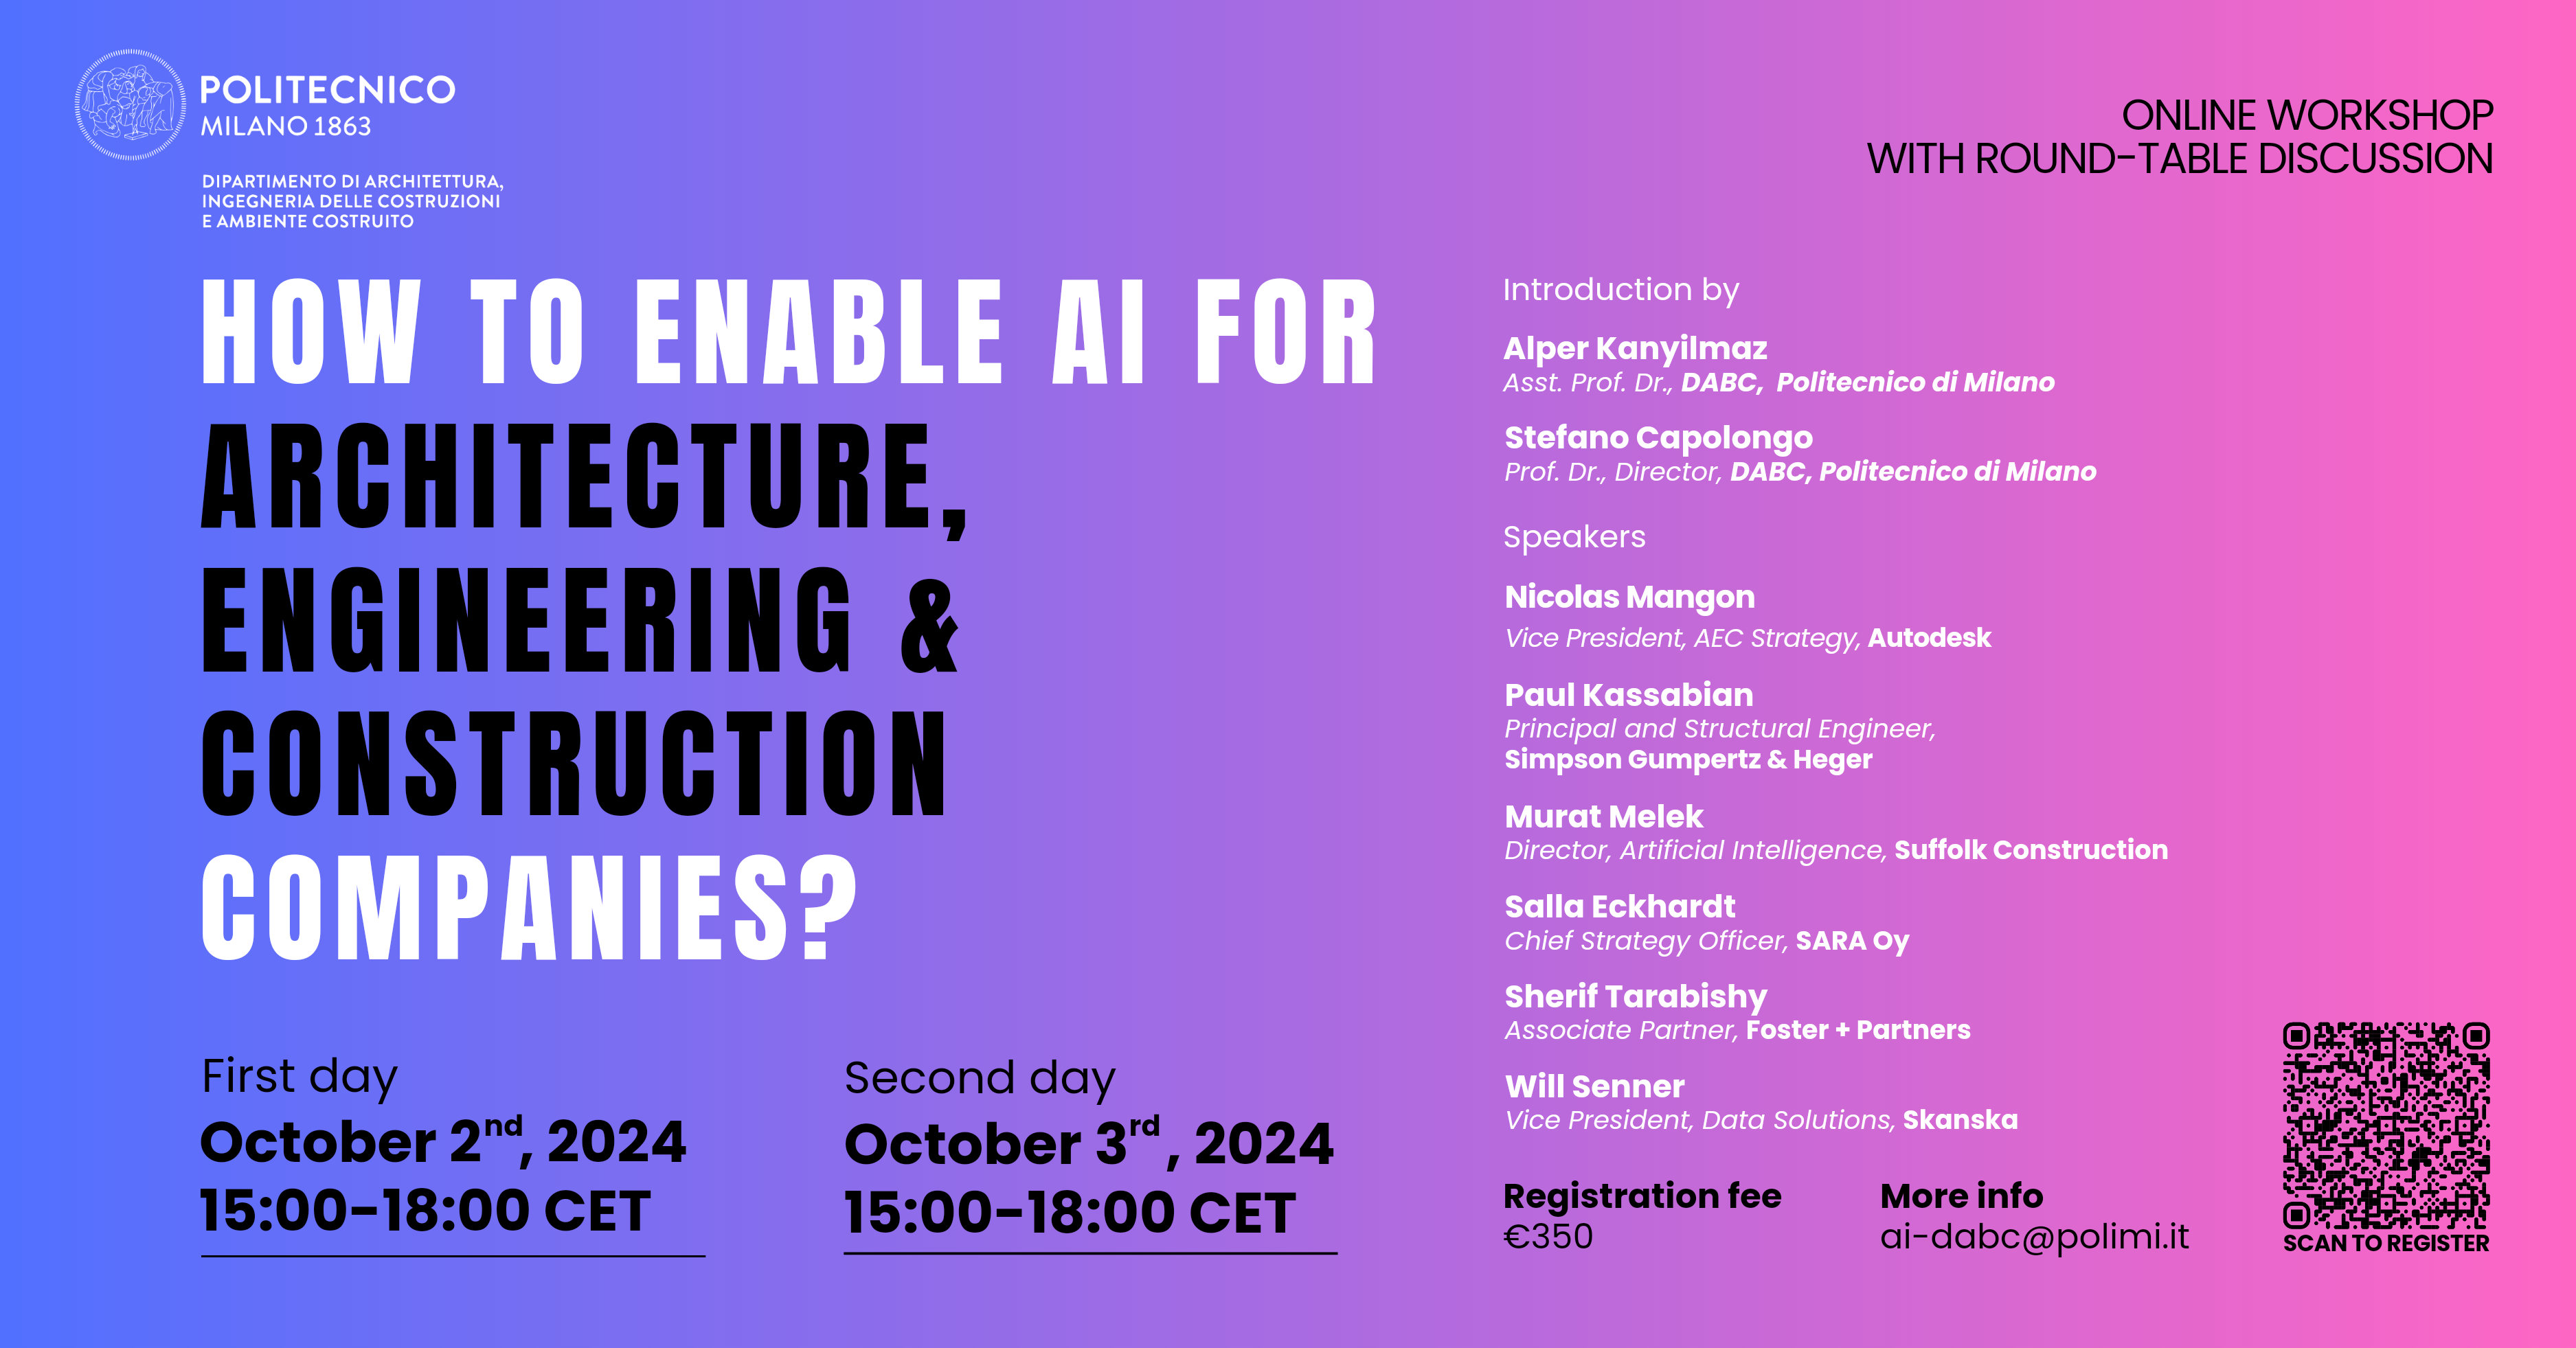 How to enable AI for Architecture, Engineering and Construction Companies?